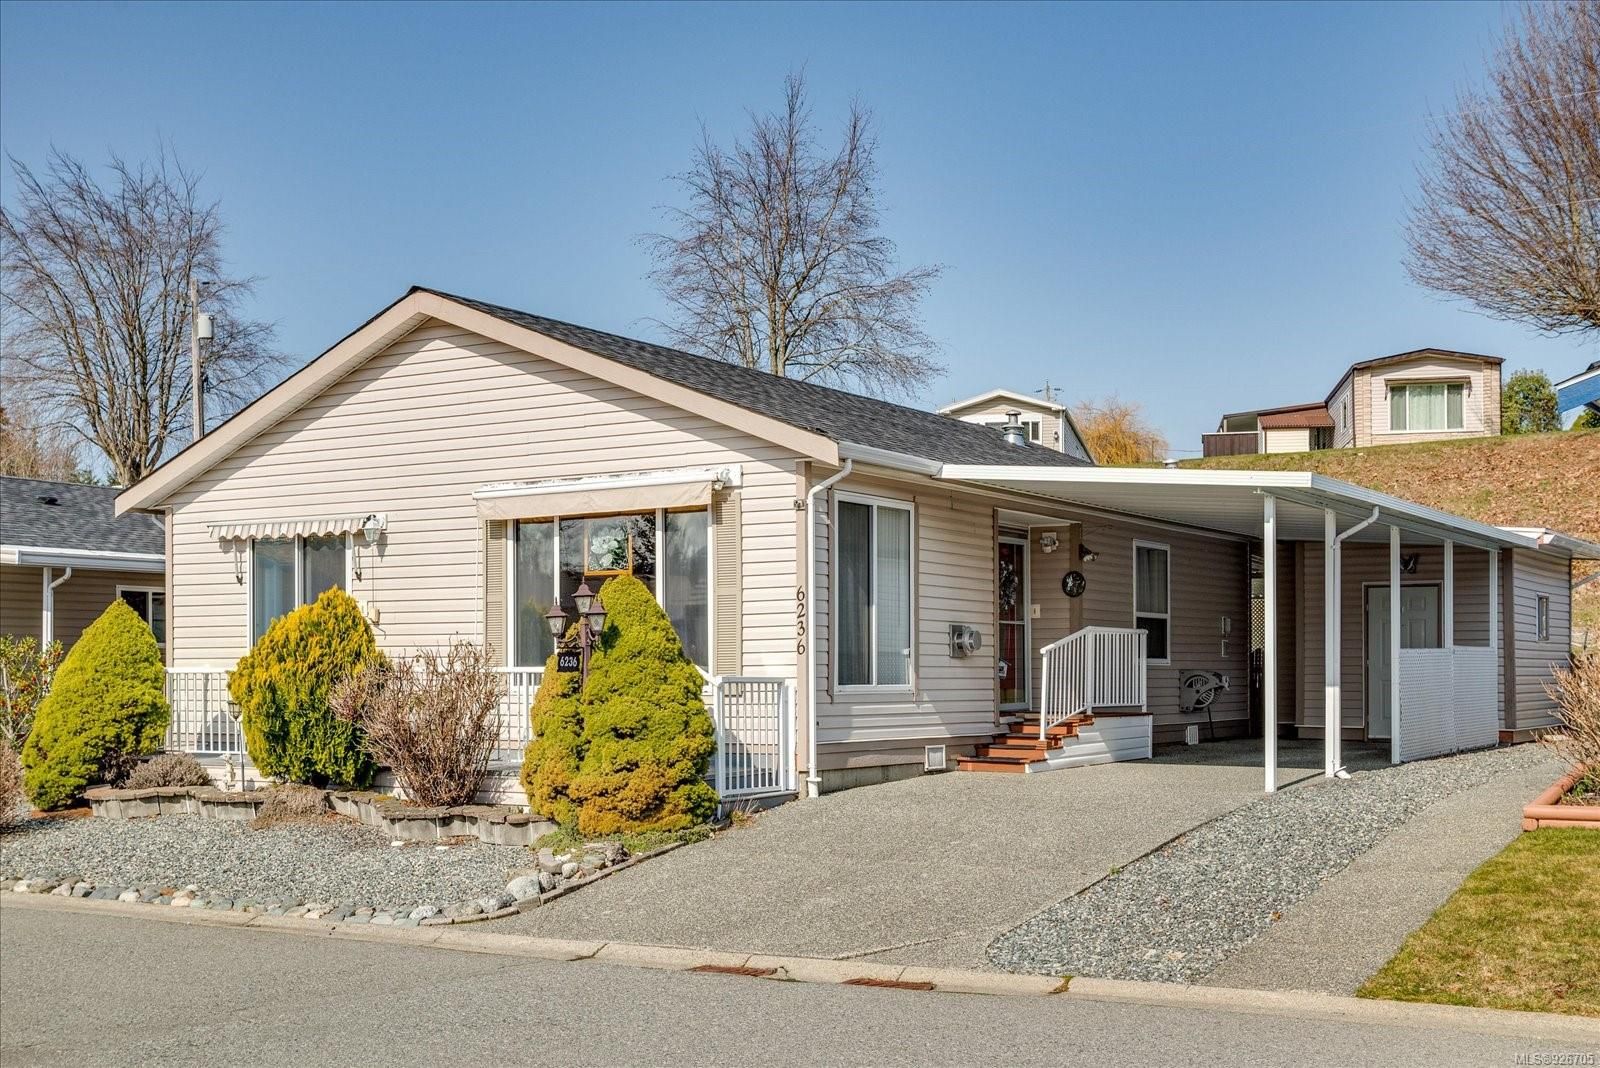 I have sold a property at 43 6236 Farber Way in Nanaimo
